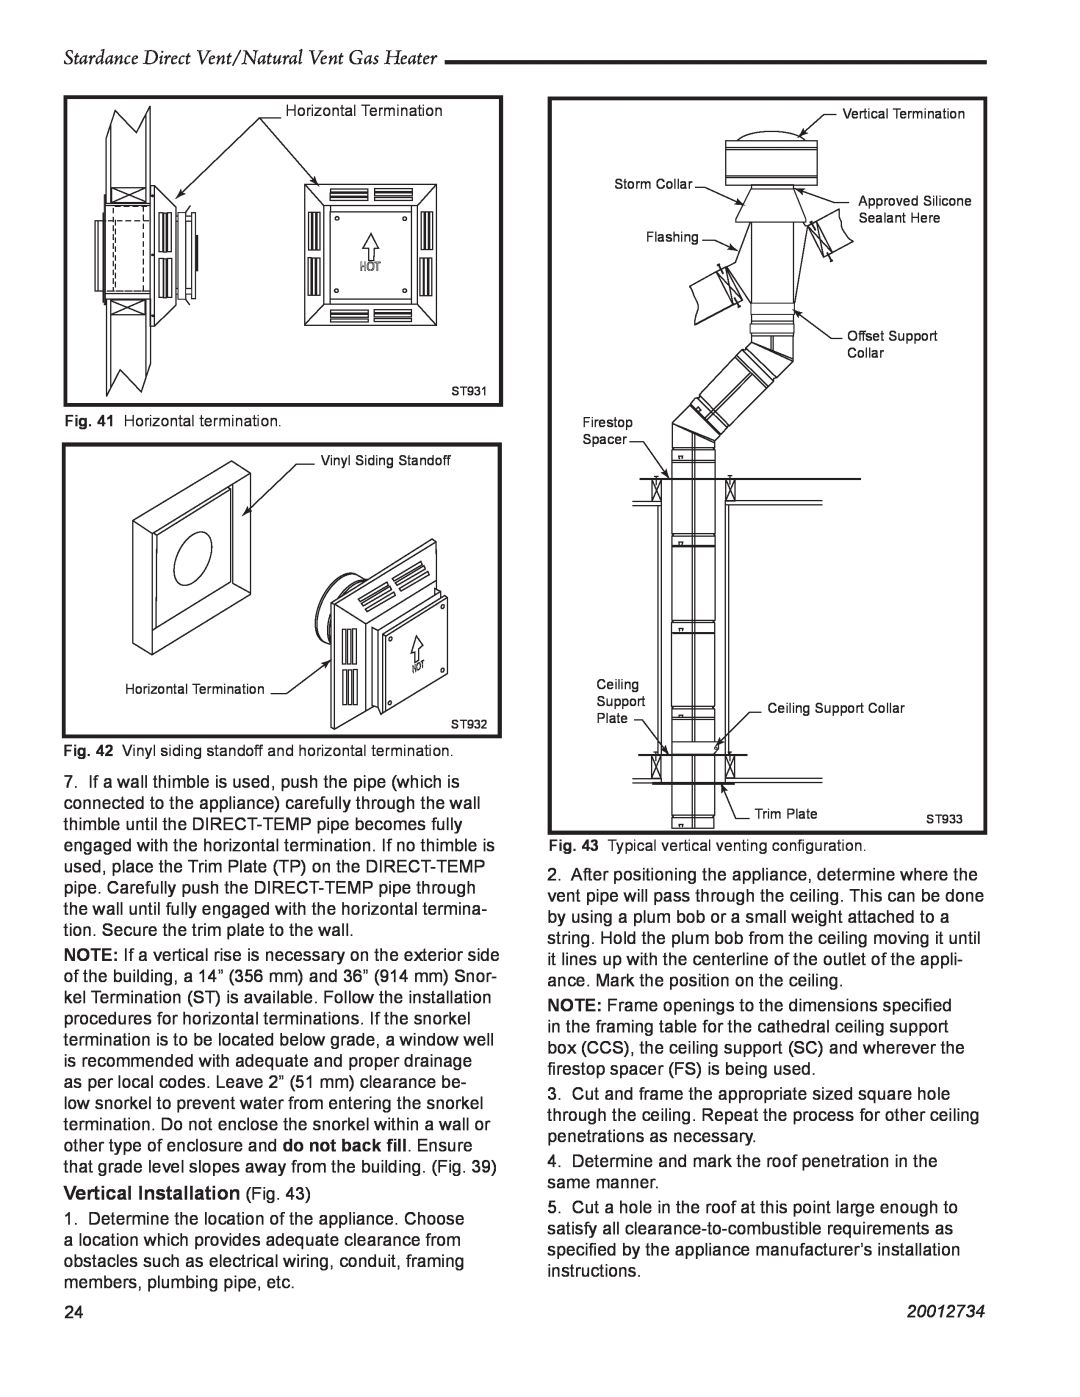 Vermont Casting SDDVTCVG, SDDVTCMB manual Stardance Direct Vent/Natural Vent Gas Heater, Vertical Installation Fig, 20012734 